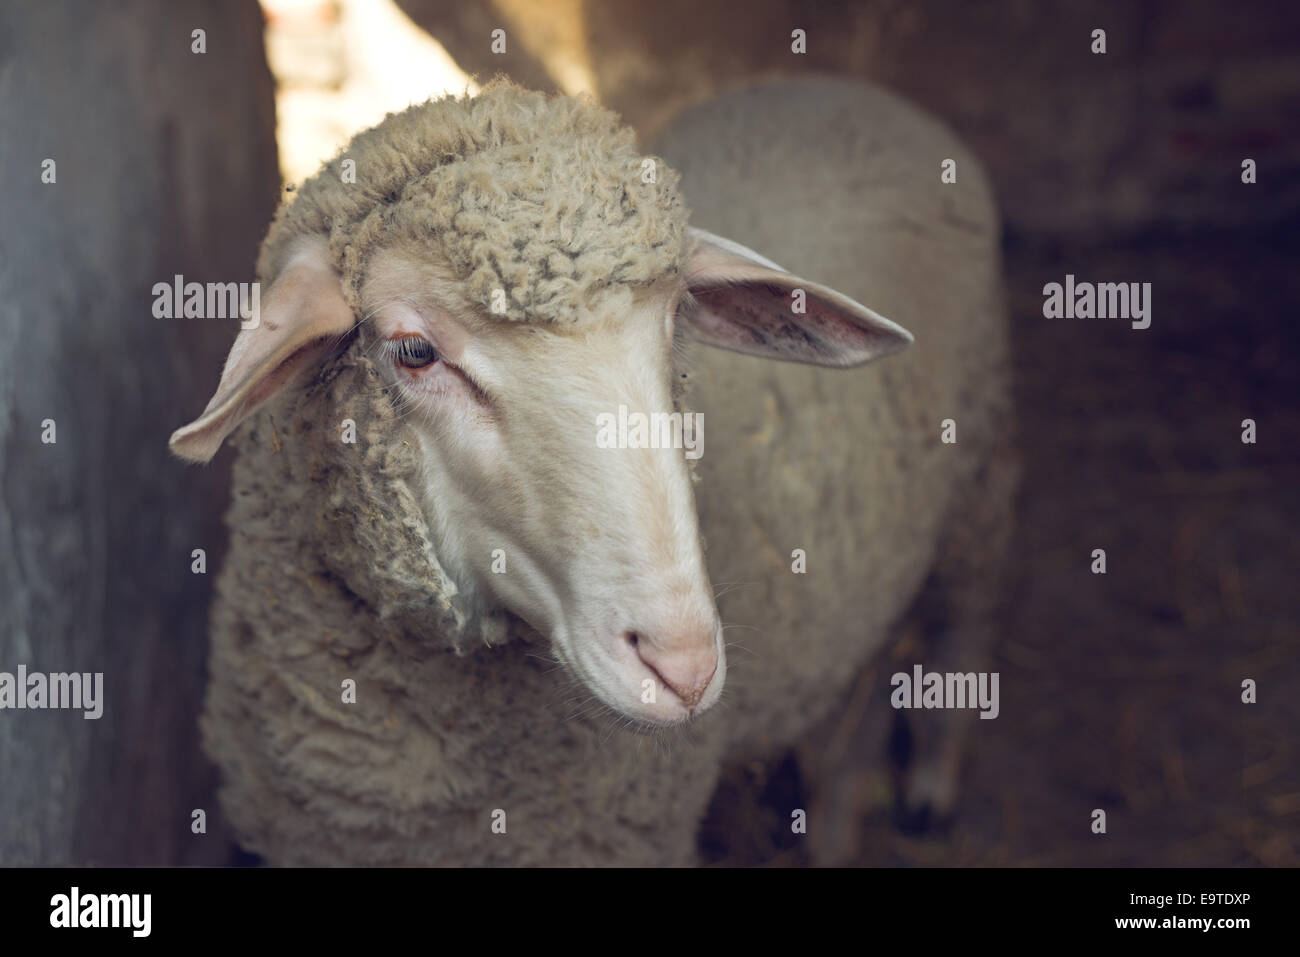 Sheep in a barn looking out behind the fence. Stock Photo